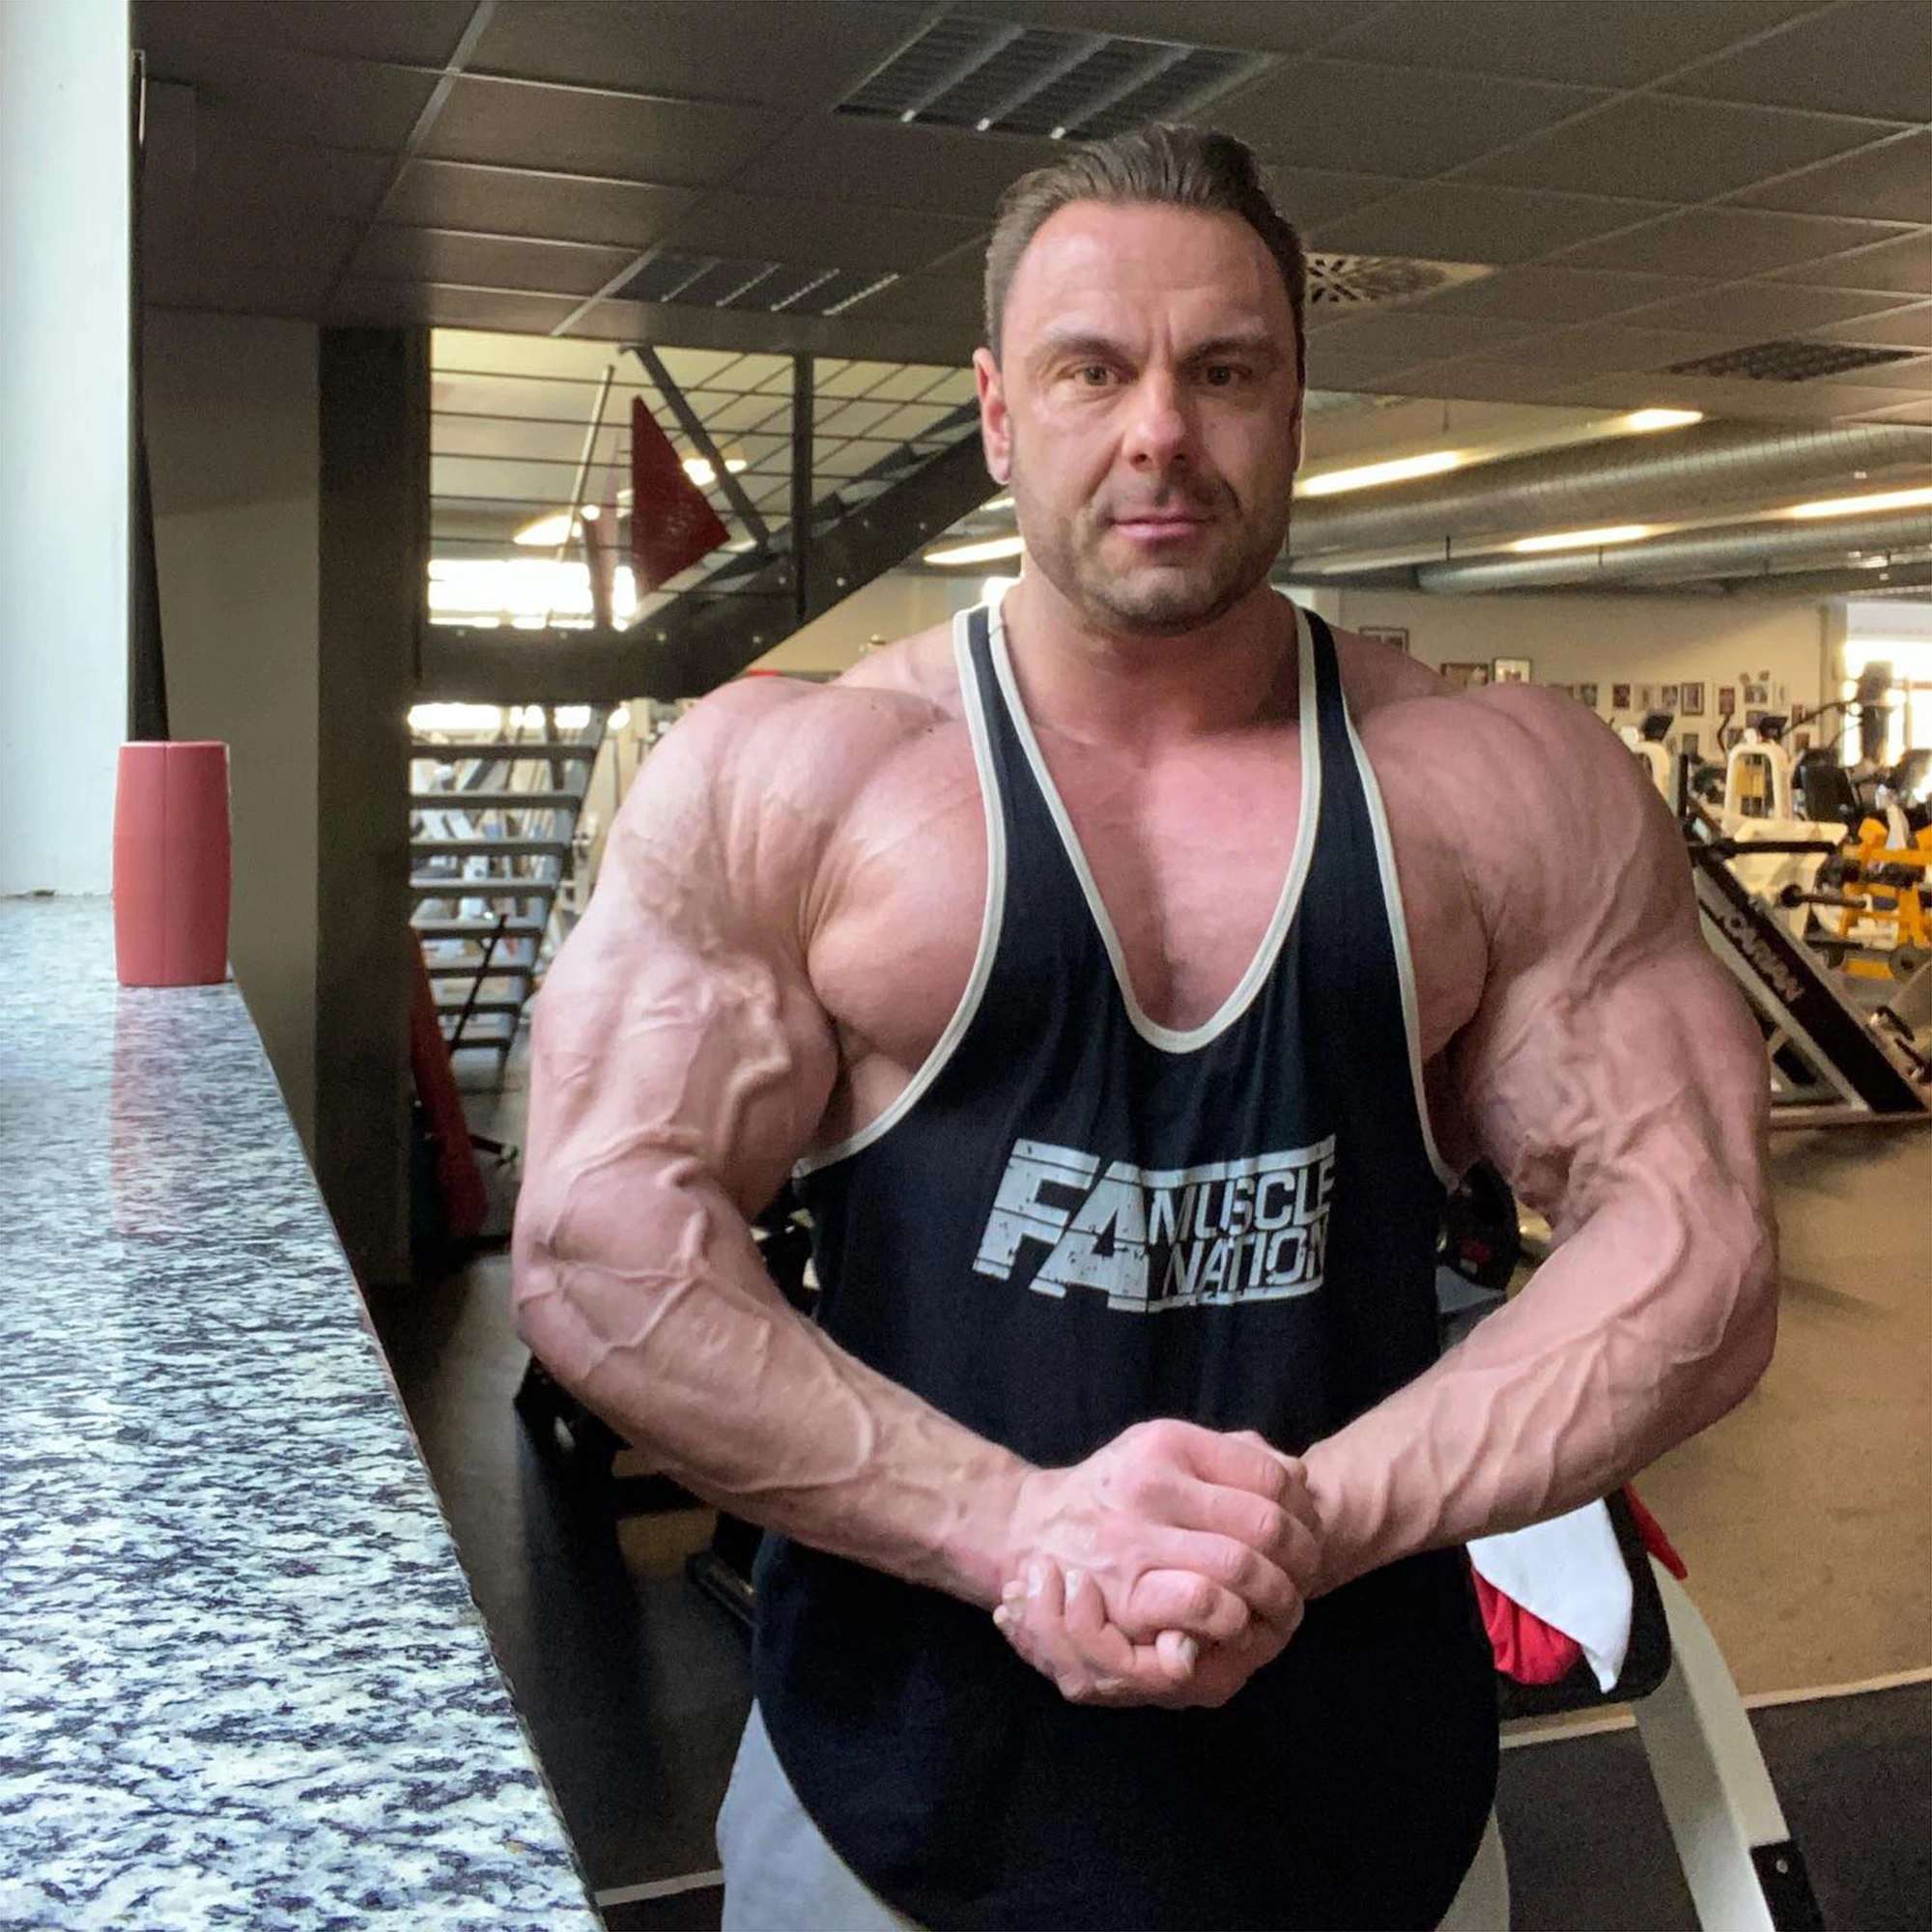 PROFESSIONAL BODY BUILDER "PAUL POLOCZEK" DIES AT 37 HOURS AFTER COMPETING IN A TOURNAMENT, PROFESSIONAL BODY BUILDER &#8220;PAUL POLOCZEK&#8221; DIES AT 37 HOURS AFTER COMPETING IN A TOURNAMENT, INFINITY LOADED